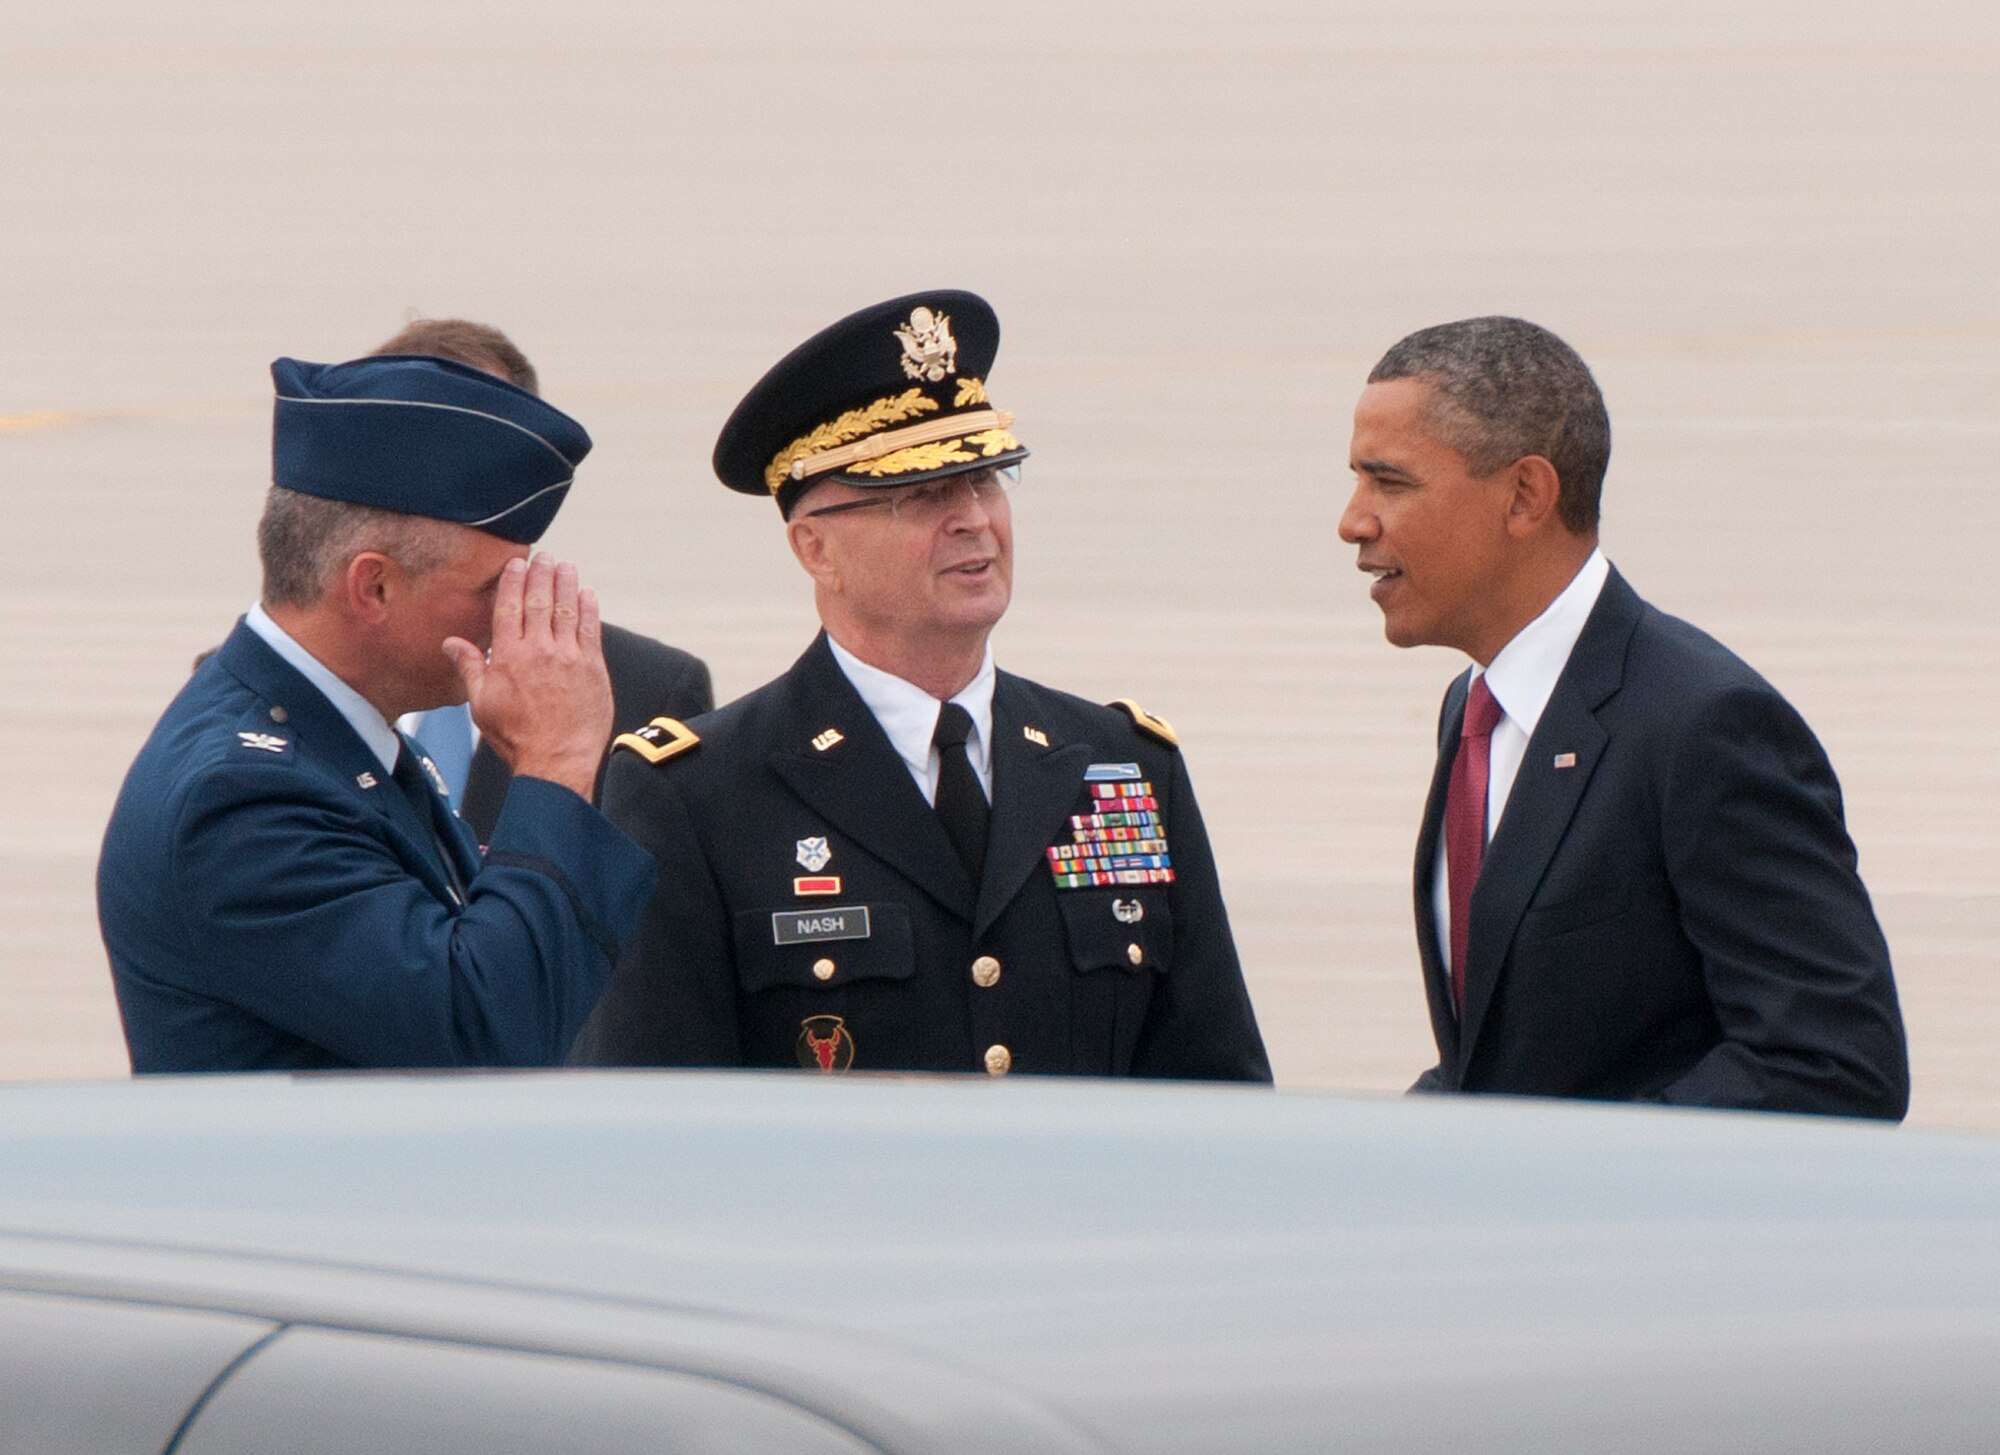 The commander-in-chief, President Barack Obama, is greeted as he steps off Air Force One by Maj. Gen Rick Nash, Minnesota’s Adjutant General (center) and Col. Greg Haase, commander of the 133rd Airlift Wing on the ramp of the 133rd Airlift Wing at the Minneapolis-St. Paul International Airport on August 30, 2011. The president is in the Twin Cities where he delivered a speech to the American Legion Annual Conference. The visit is heavily supported with security, logistics, media and other support by the Airmen of the 133rd Airlift Wing. USAF official photo by Senior Master Sgt. Mark Moss